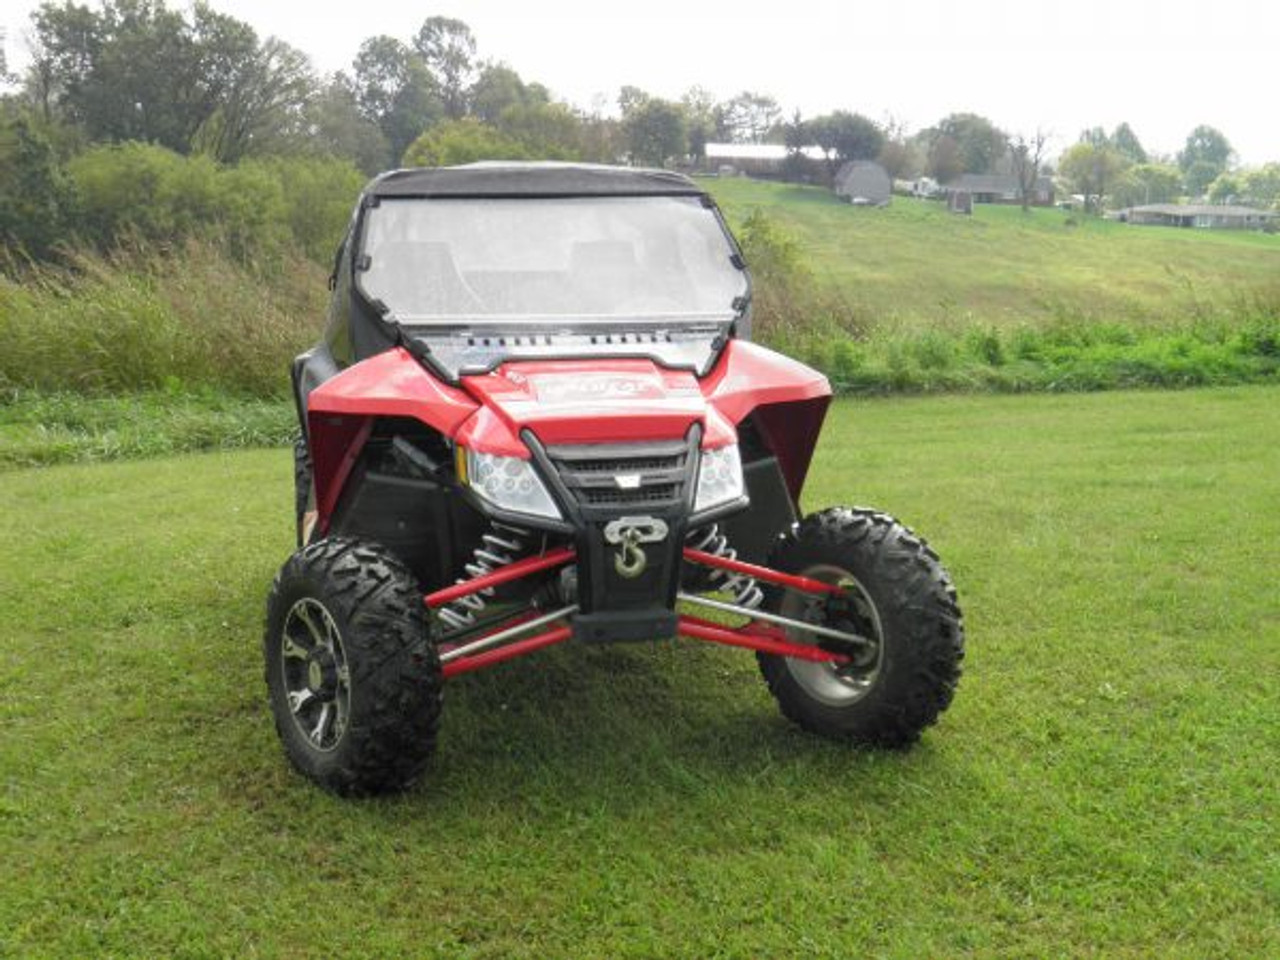 3 Star, side x side, side by side, utv, sxs, accessories, arctic cat, textron, wildcat, x, 1000, wildcat x, wildcat 1000, full cab enclosure, front view